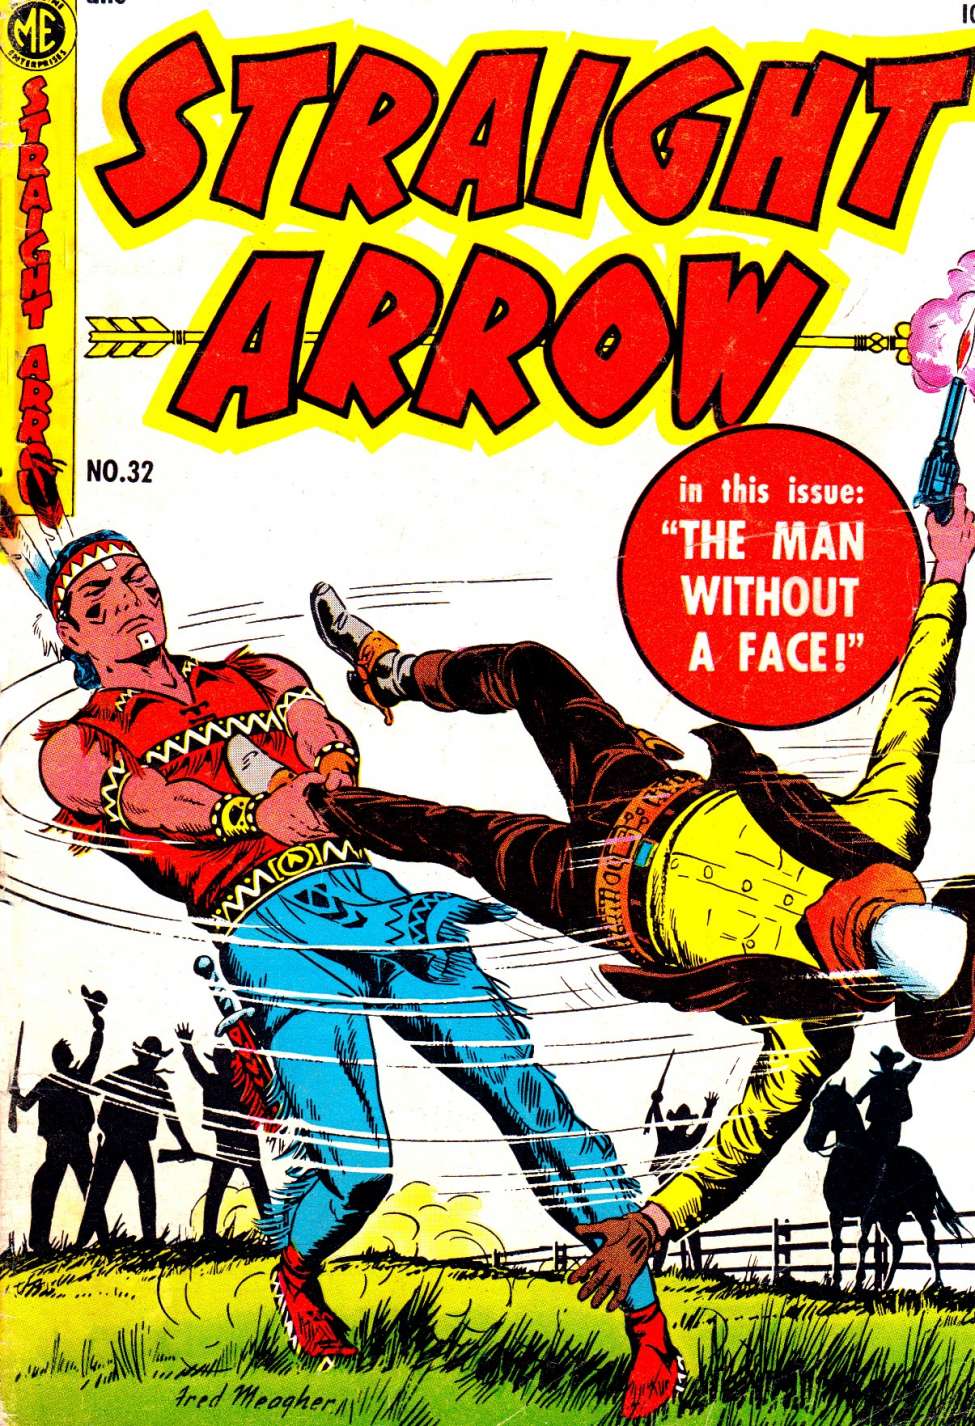 Book Cover For Straight Arrow 32